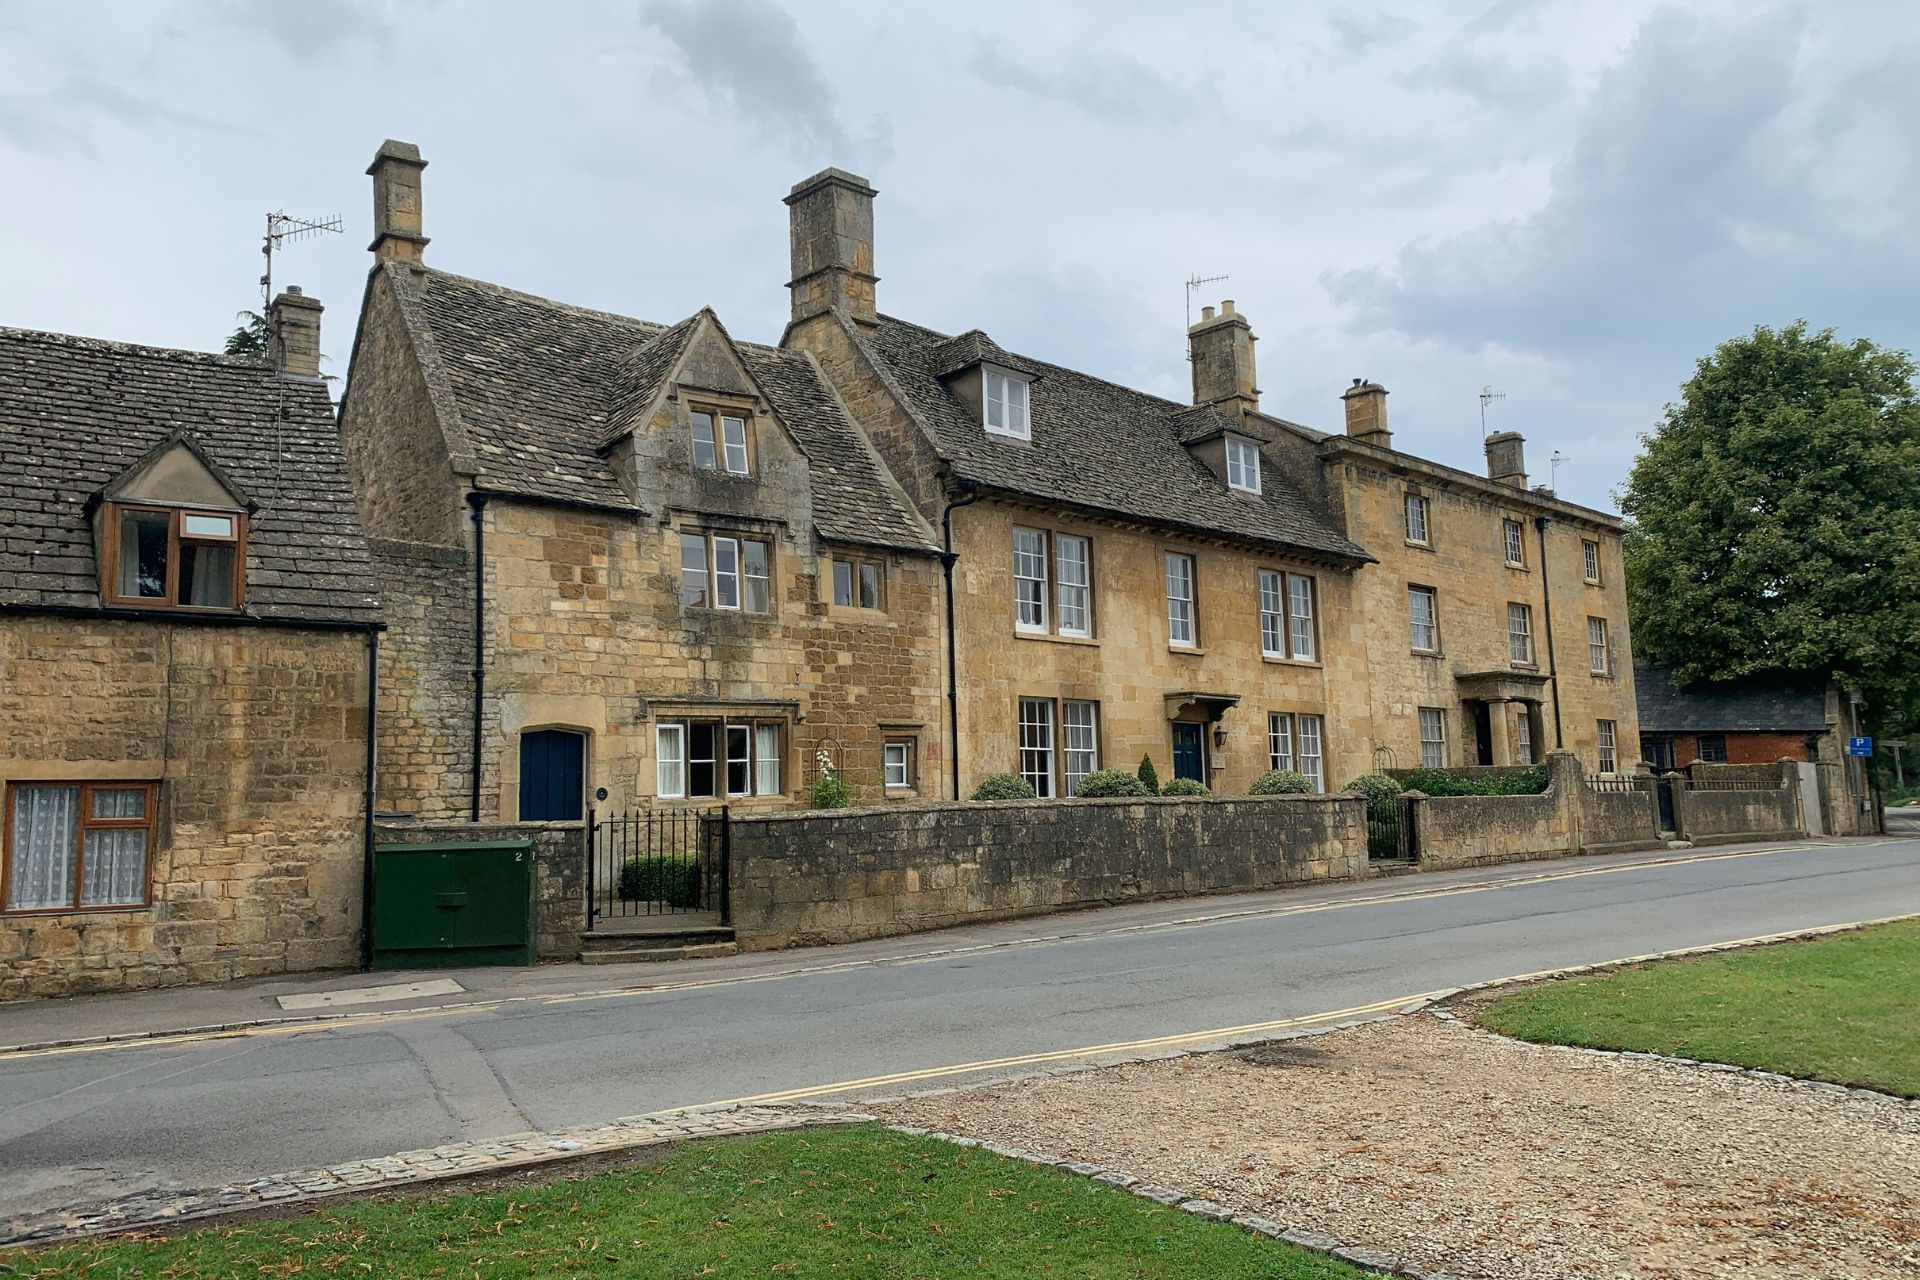 Where Is Taylor Swift Staying In The Cotswolds?